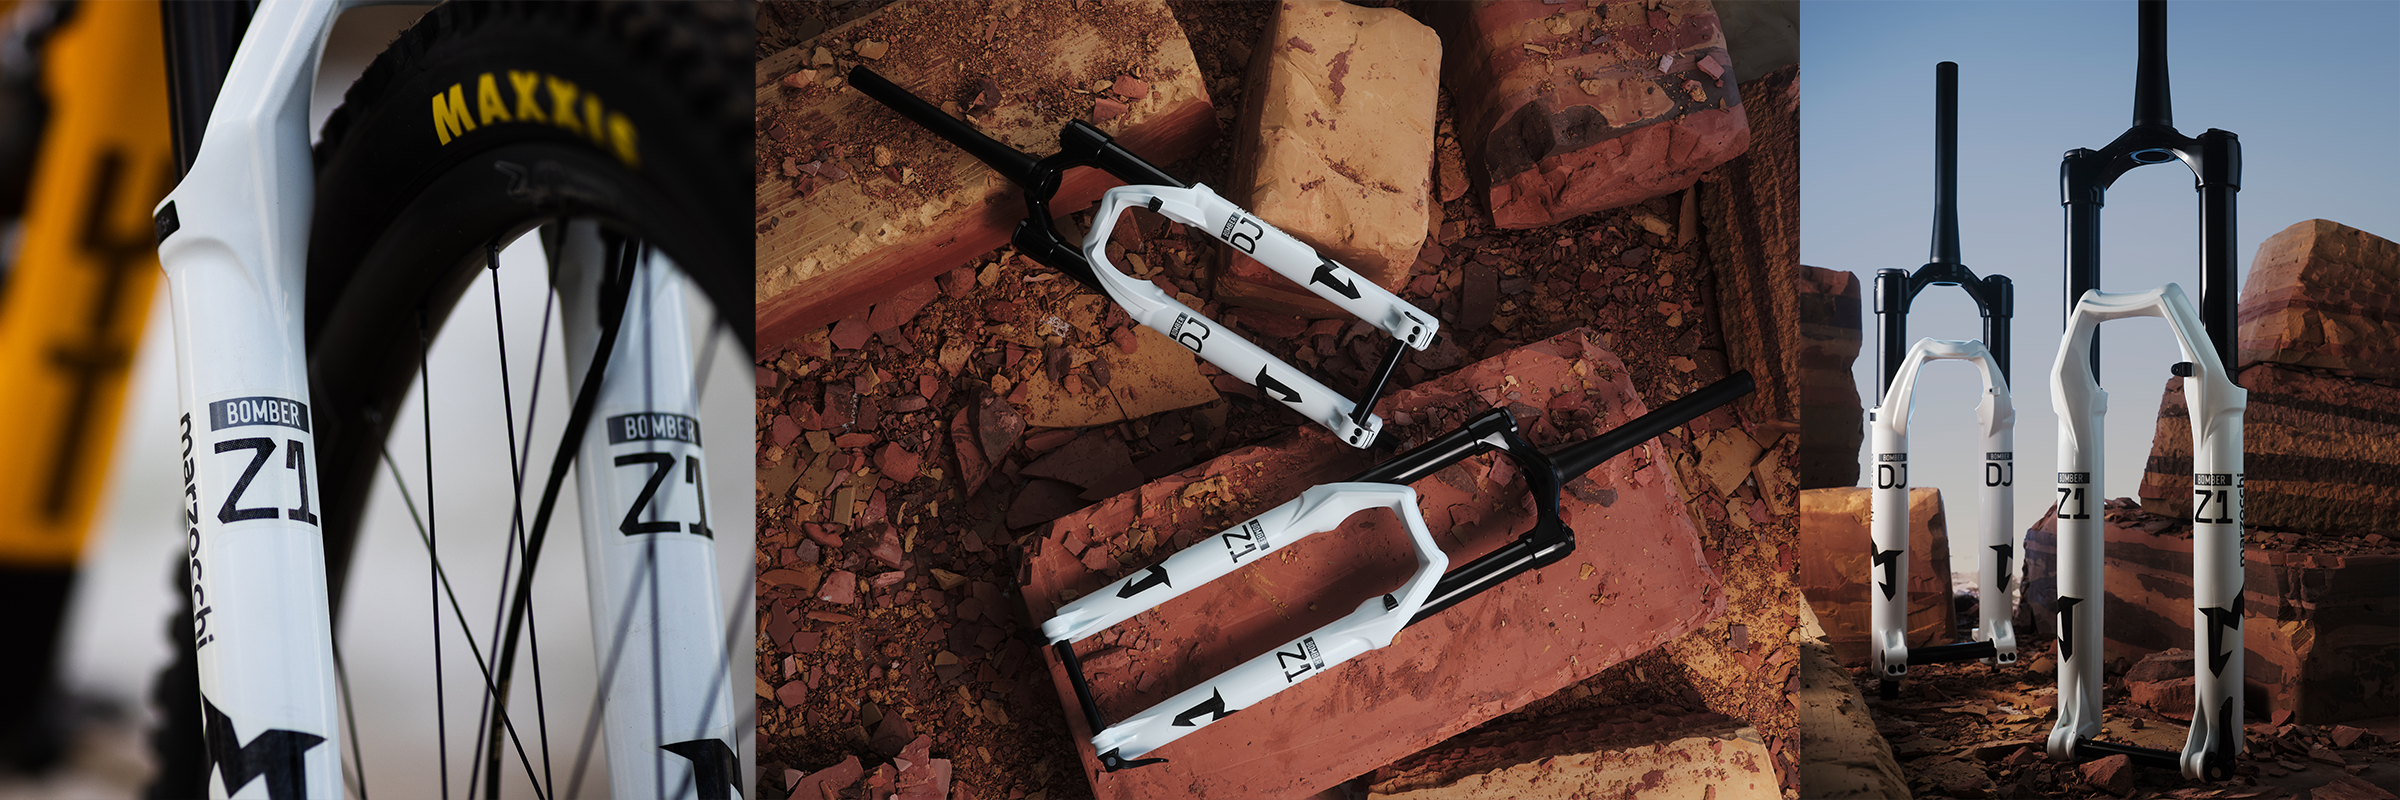 MARZOCCHI BOMBER FORKS - LIMITED EDITION WHITE